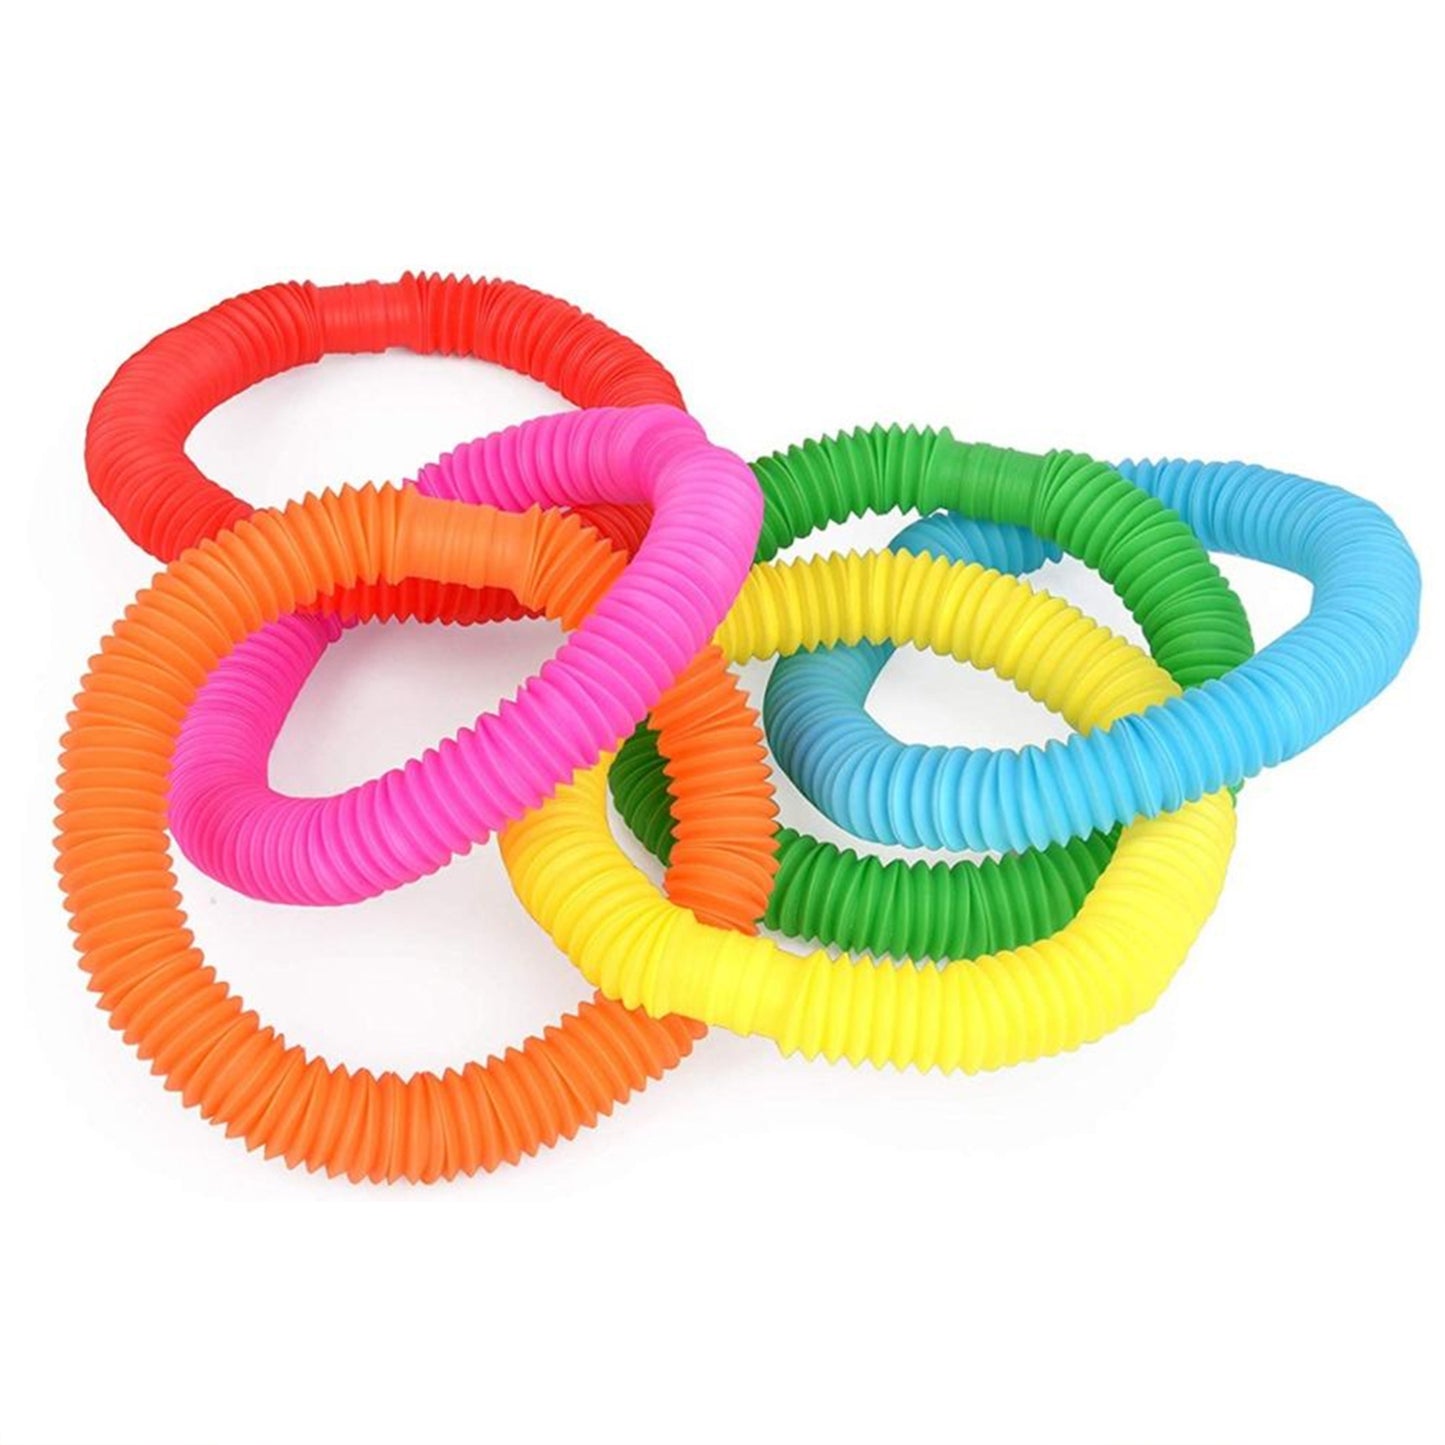 6 Packs Colorful DIY Fidget Pop Tube Toys for Kids, 27 inches Stretched Tube